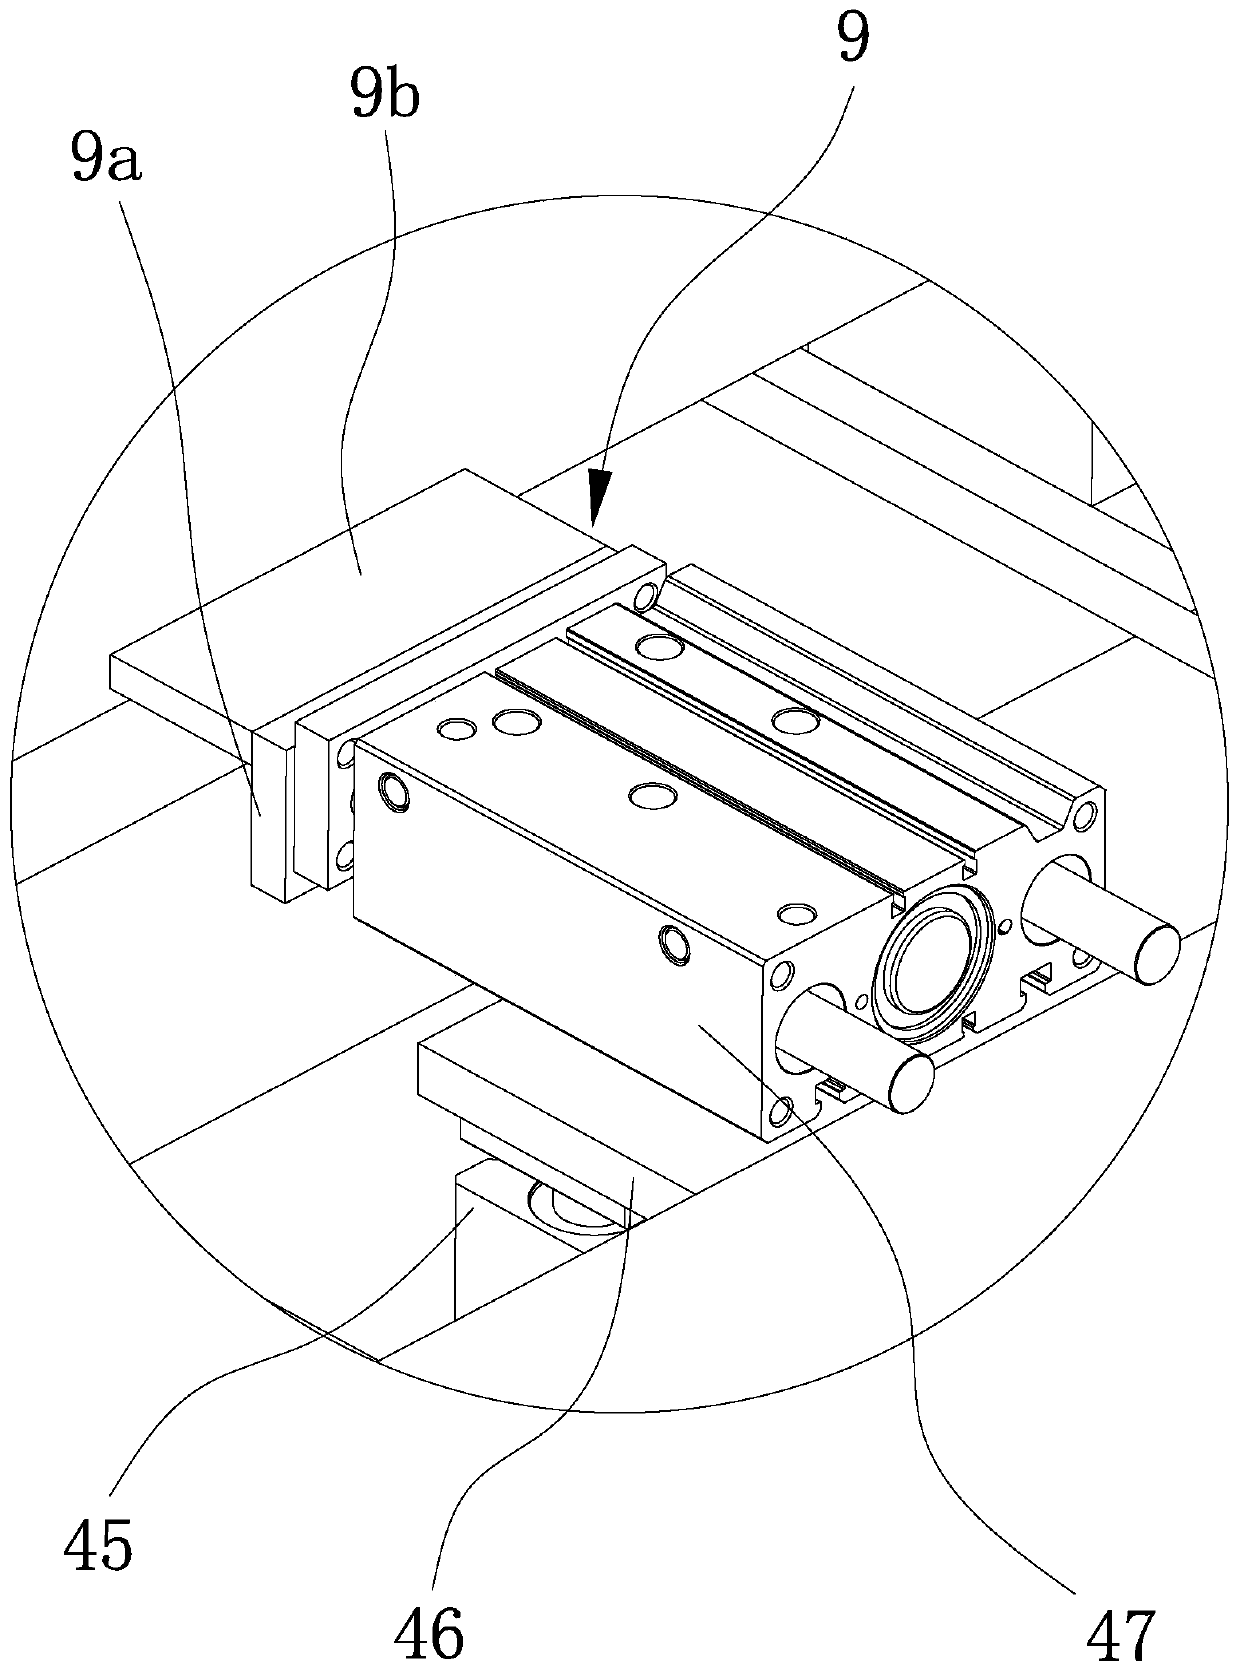 Double-end cross saw device